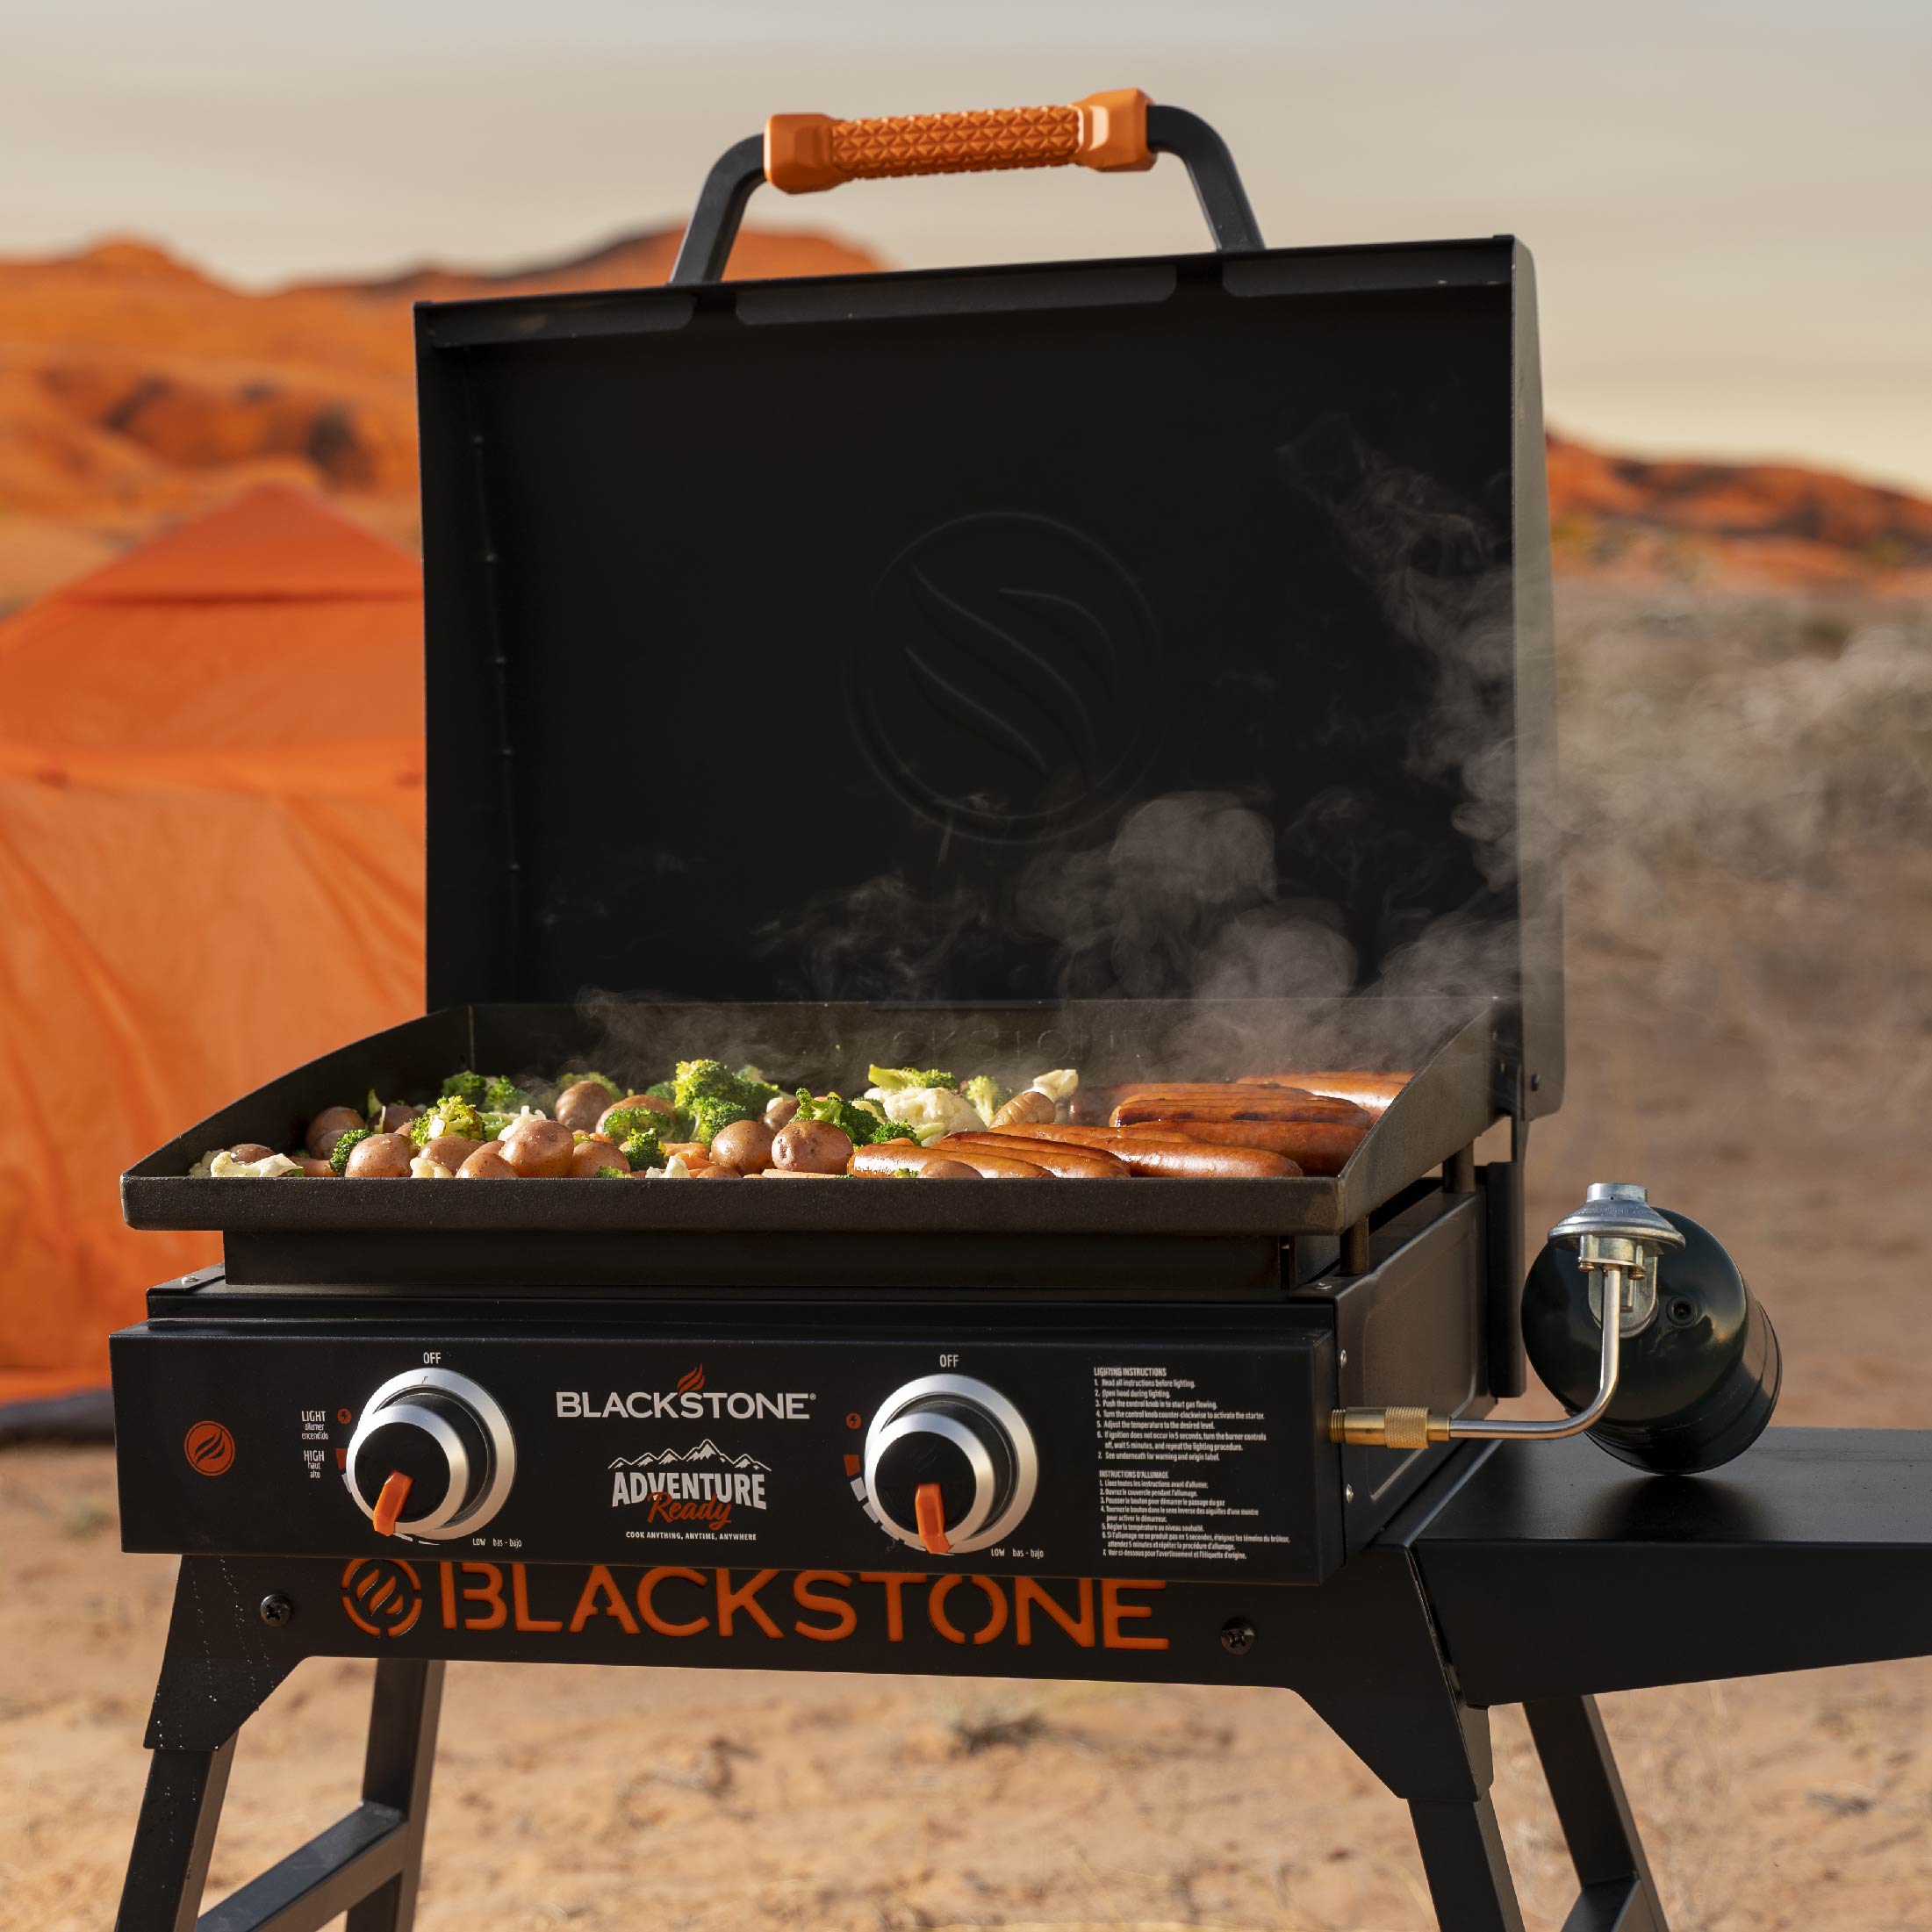 Blackstone Adventure Ready 22" Propane Griddle with Stand and Adapter Hose - image 3 of 16